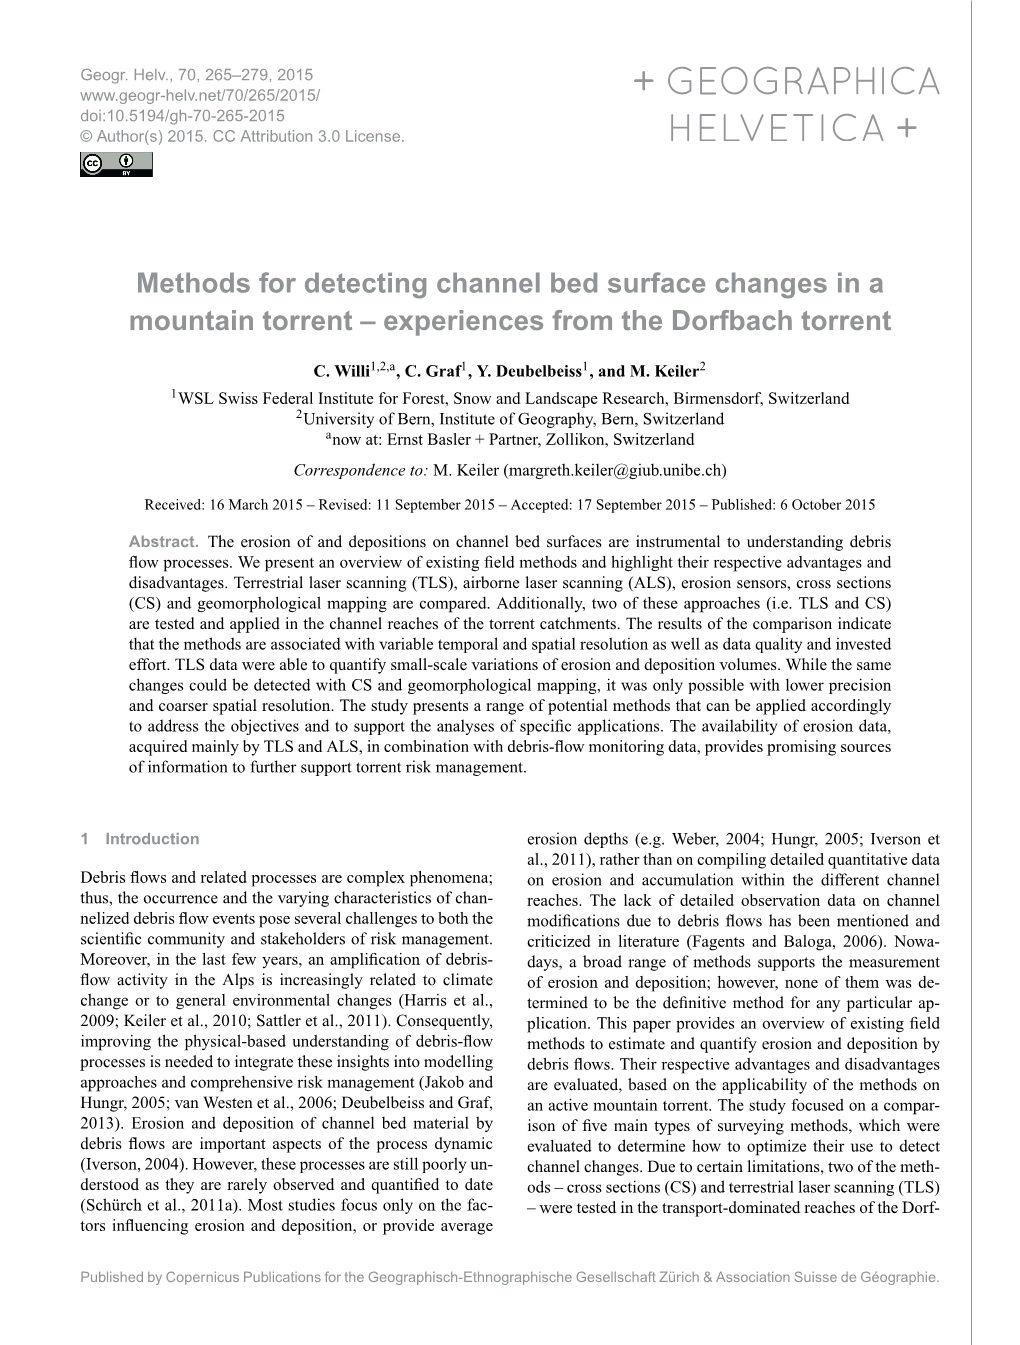 Methods for Detecting Channel Bed Surface Changes in a Mountain Torrent – Experiences from the Dorfbach Torrent